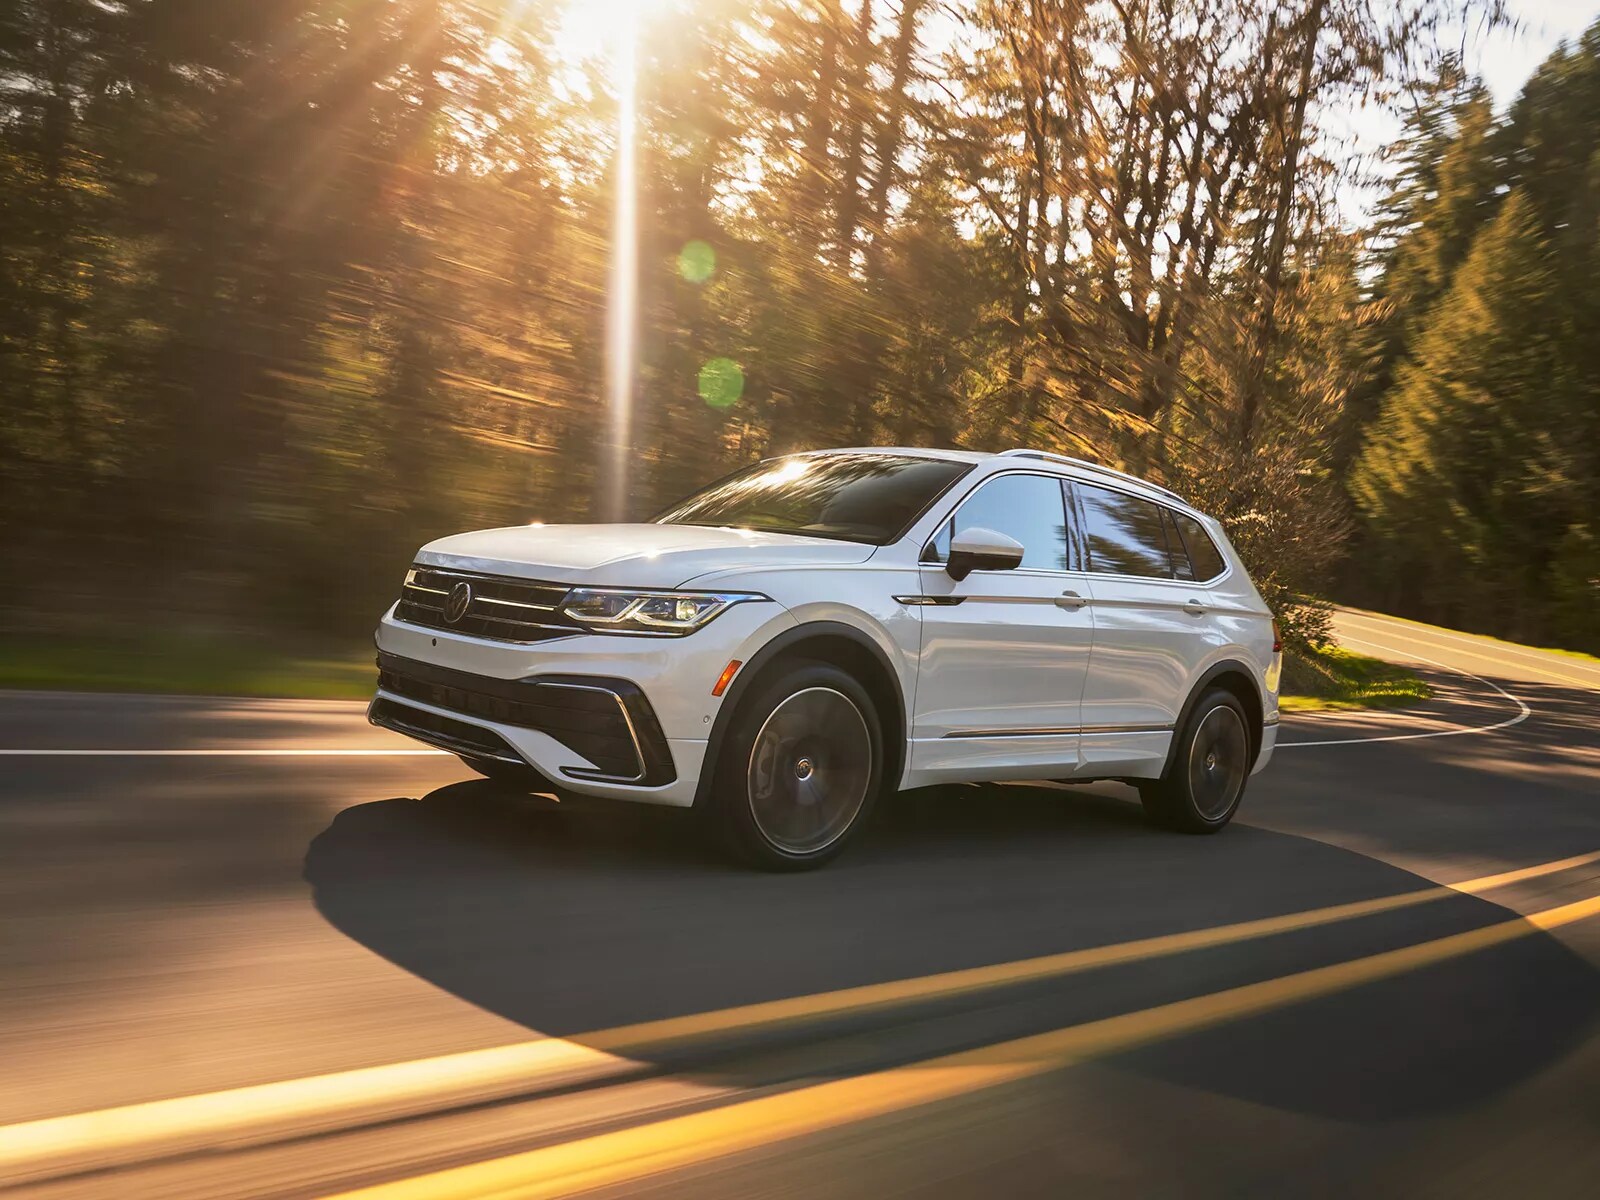 2023 VW Tiguan safety features